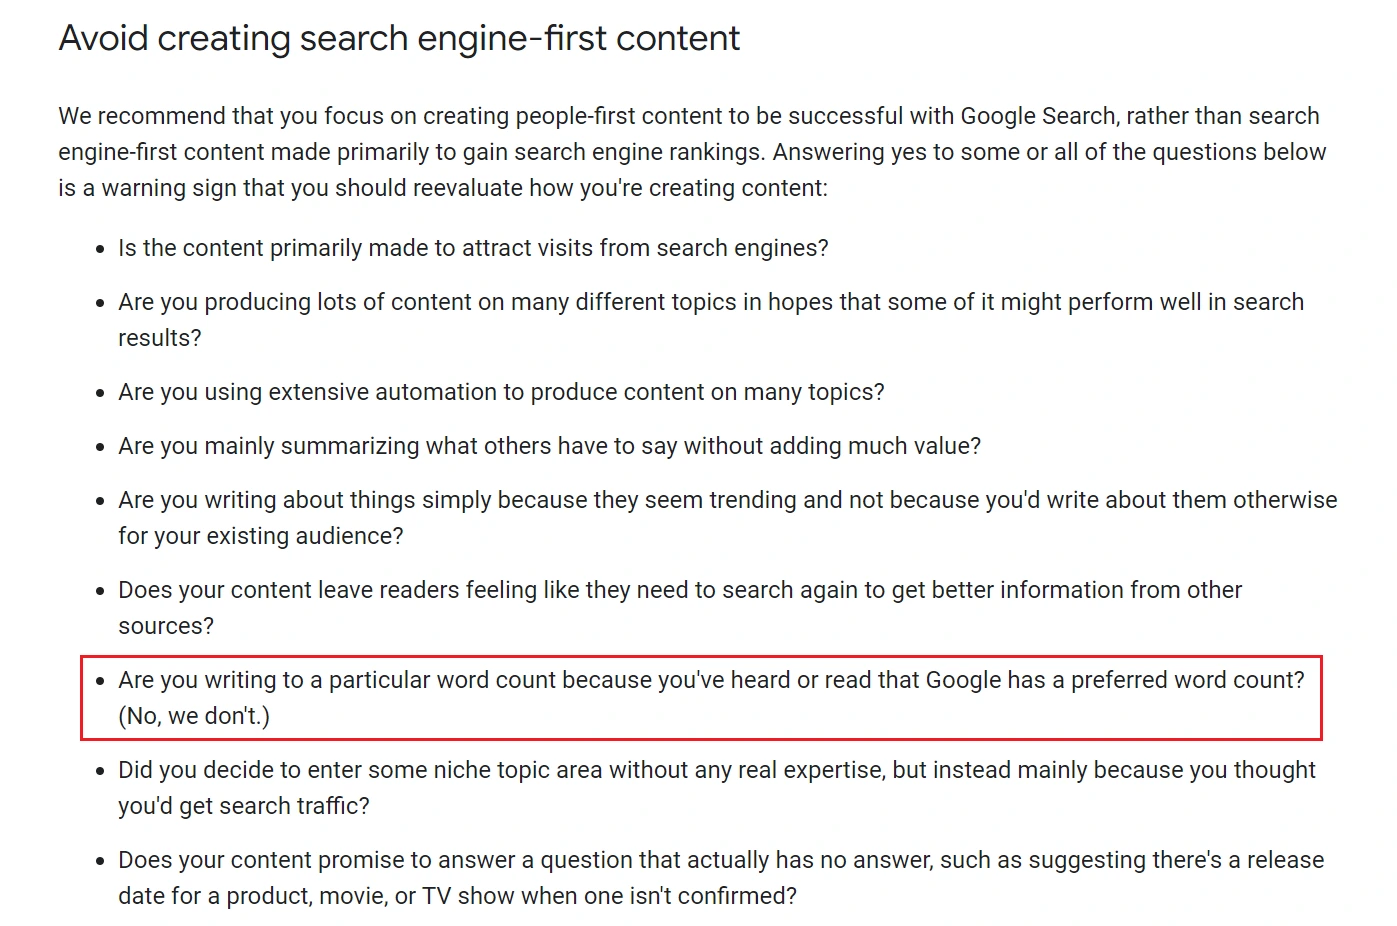 Google confirming word count does not affect SEO